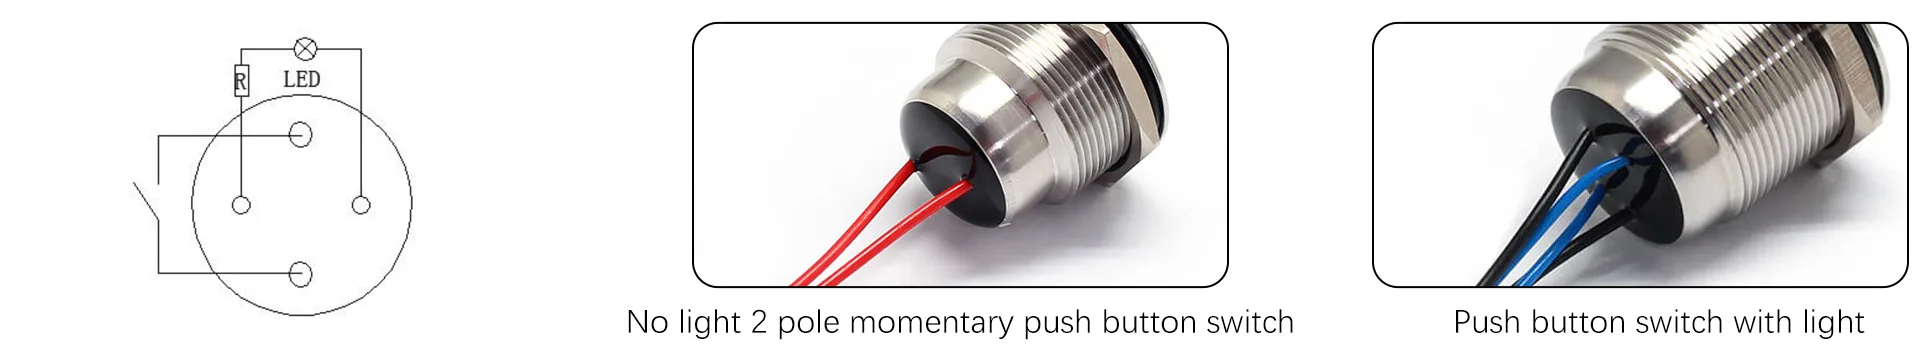 2 pole momentary push button switch